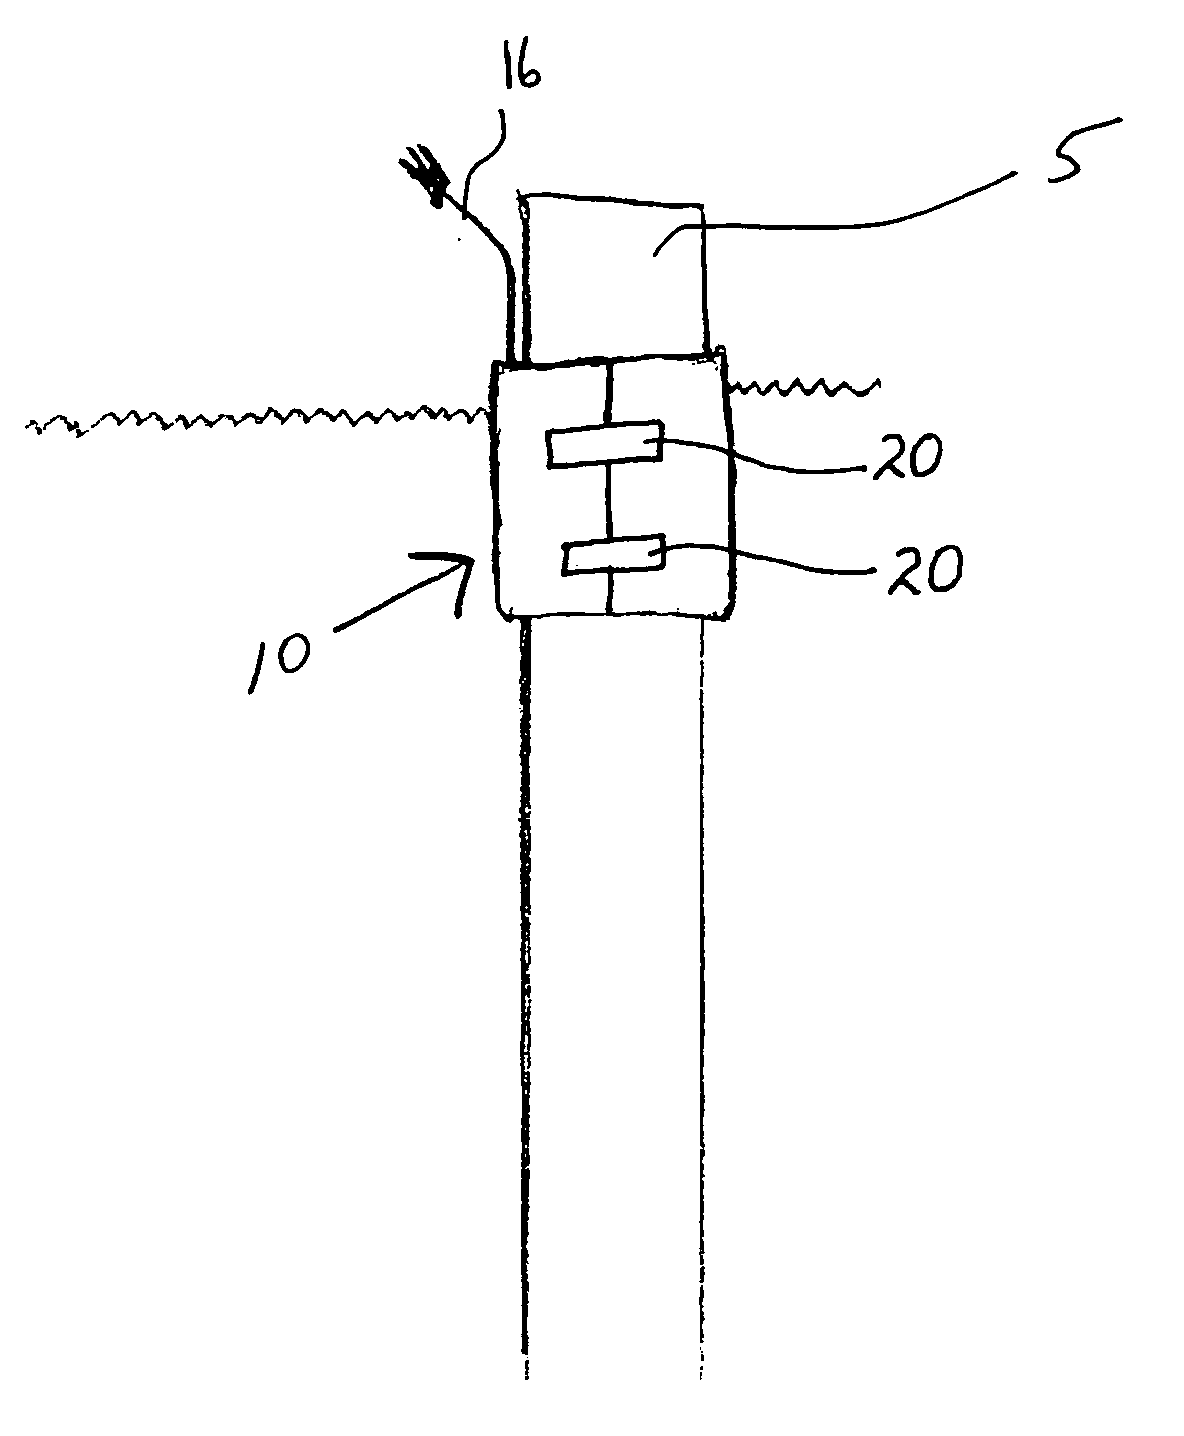 Method and apparatus for preventing dock or structure piling uplift